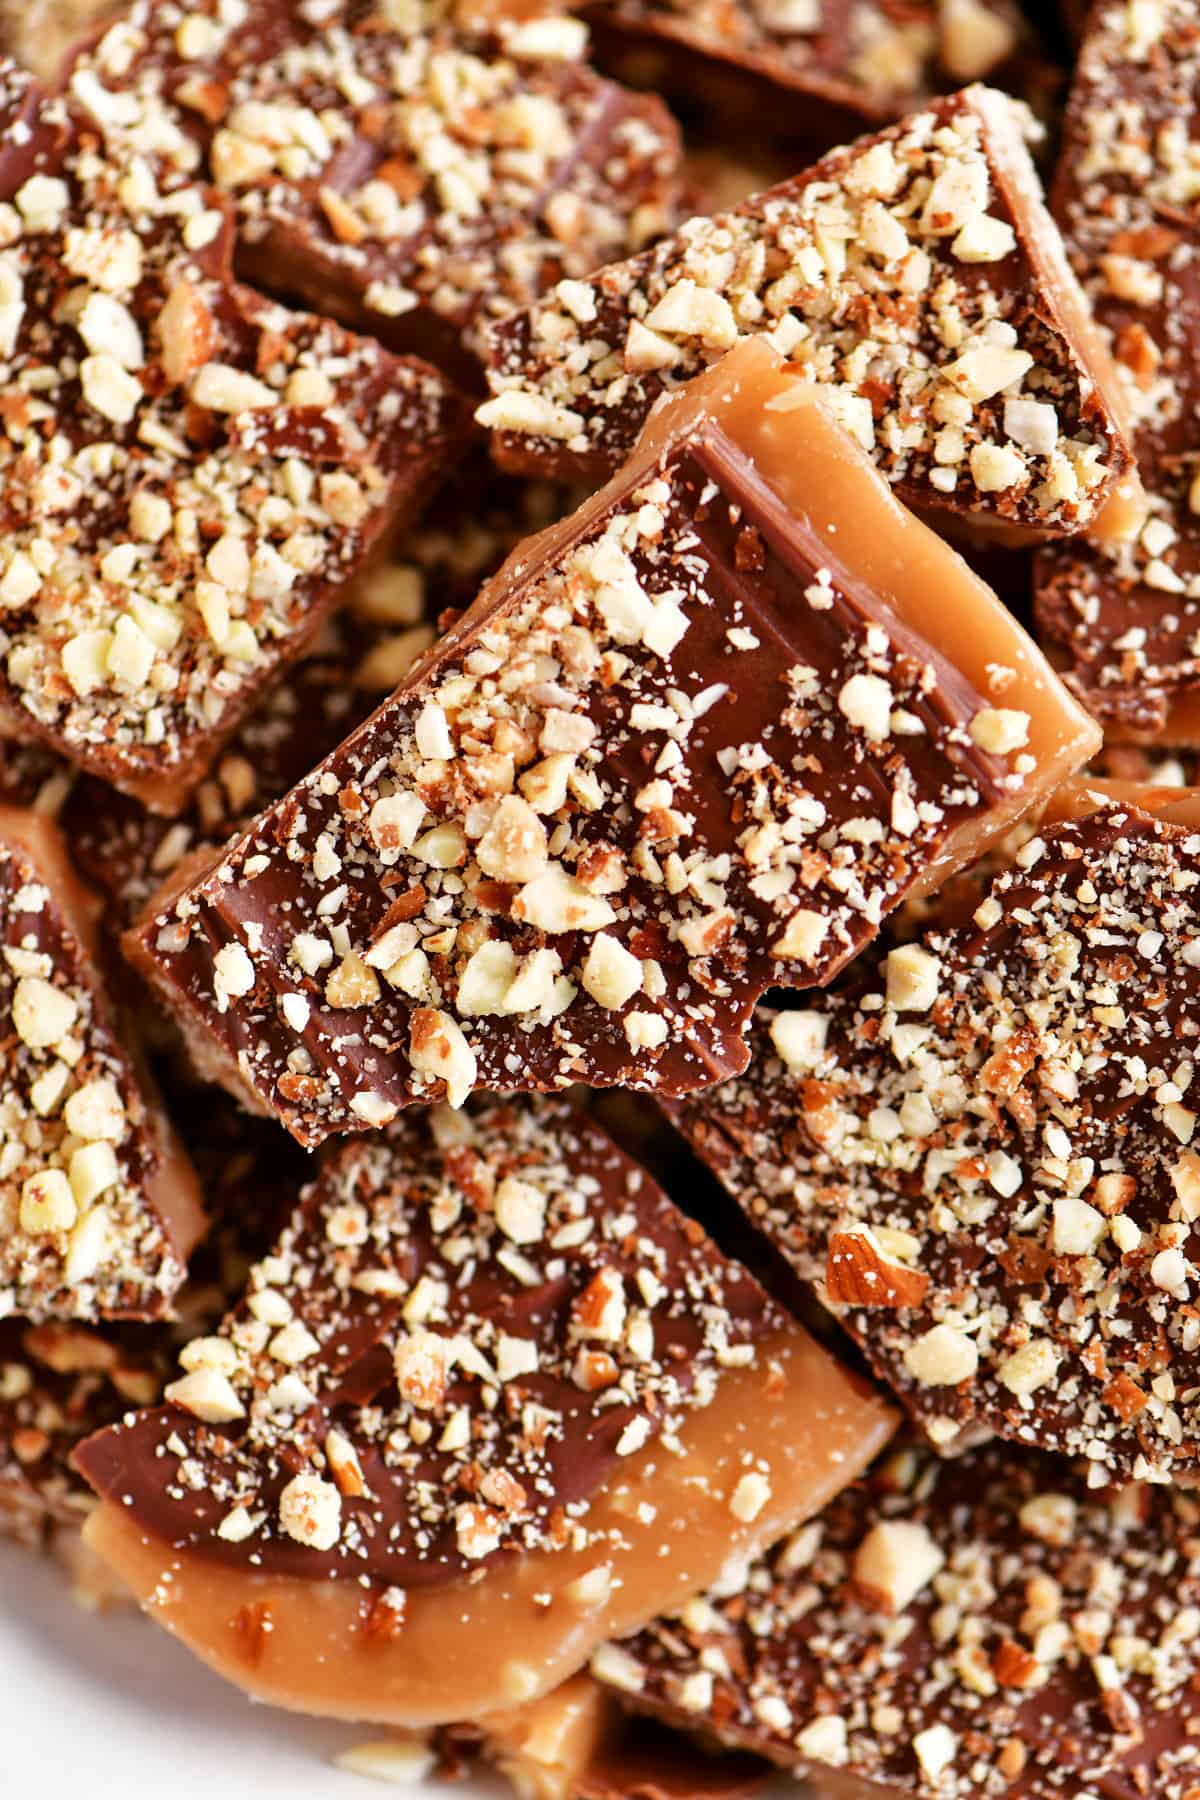 a close-up view of the delectable toffee